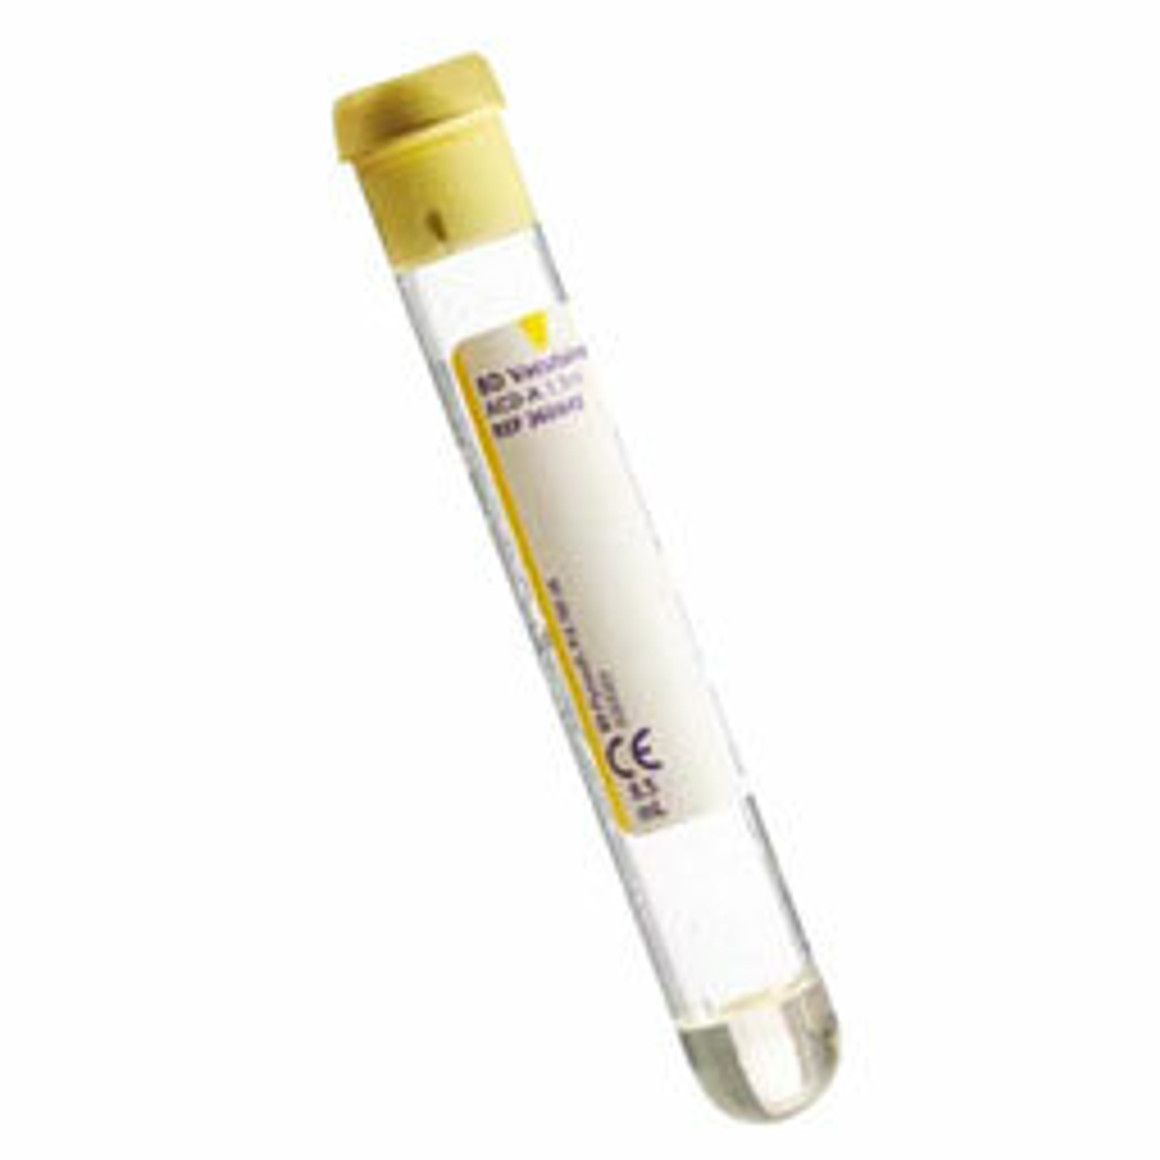 BD Vacutainer Glass Whole Blood Tube, ACD B, Yellow, 6 mL